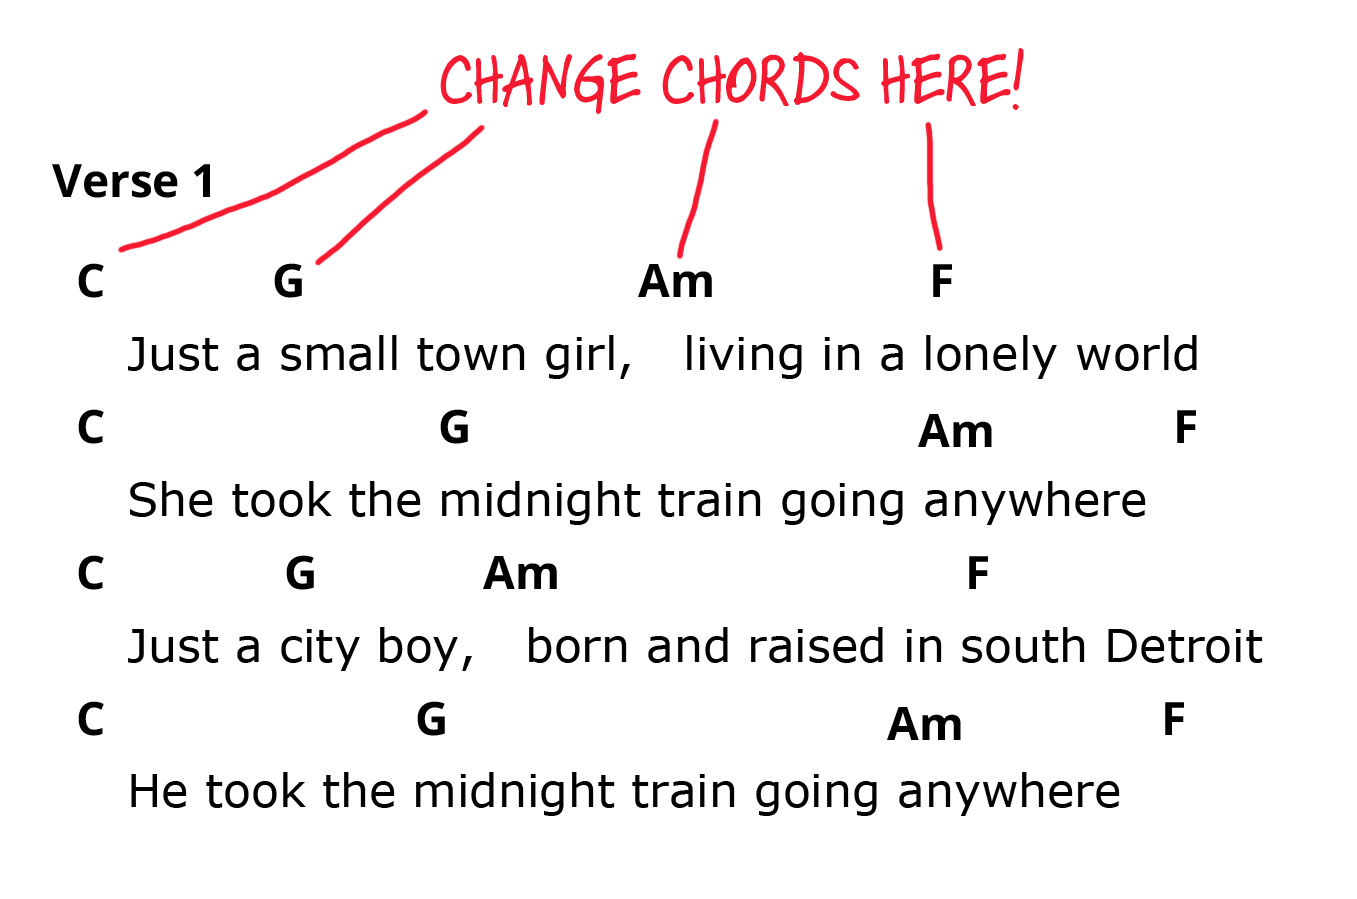 Pop piano songs. Chord chart for first verse of "Don't Stop Believin'" by Journey with chord changes labelled.